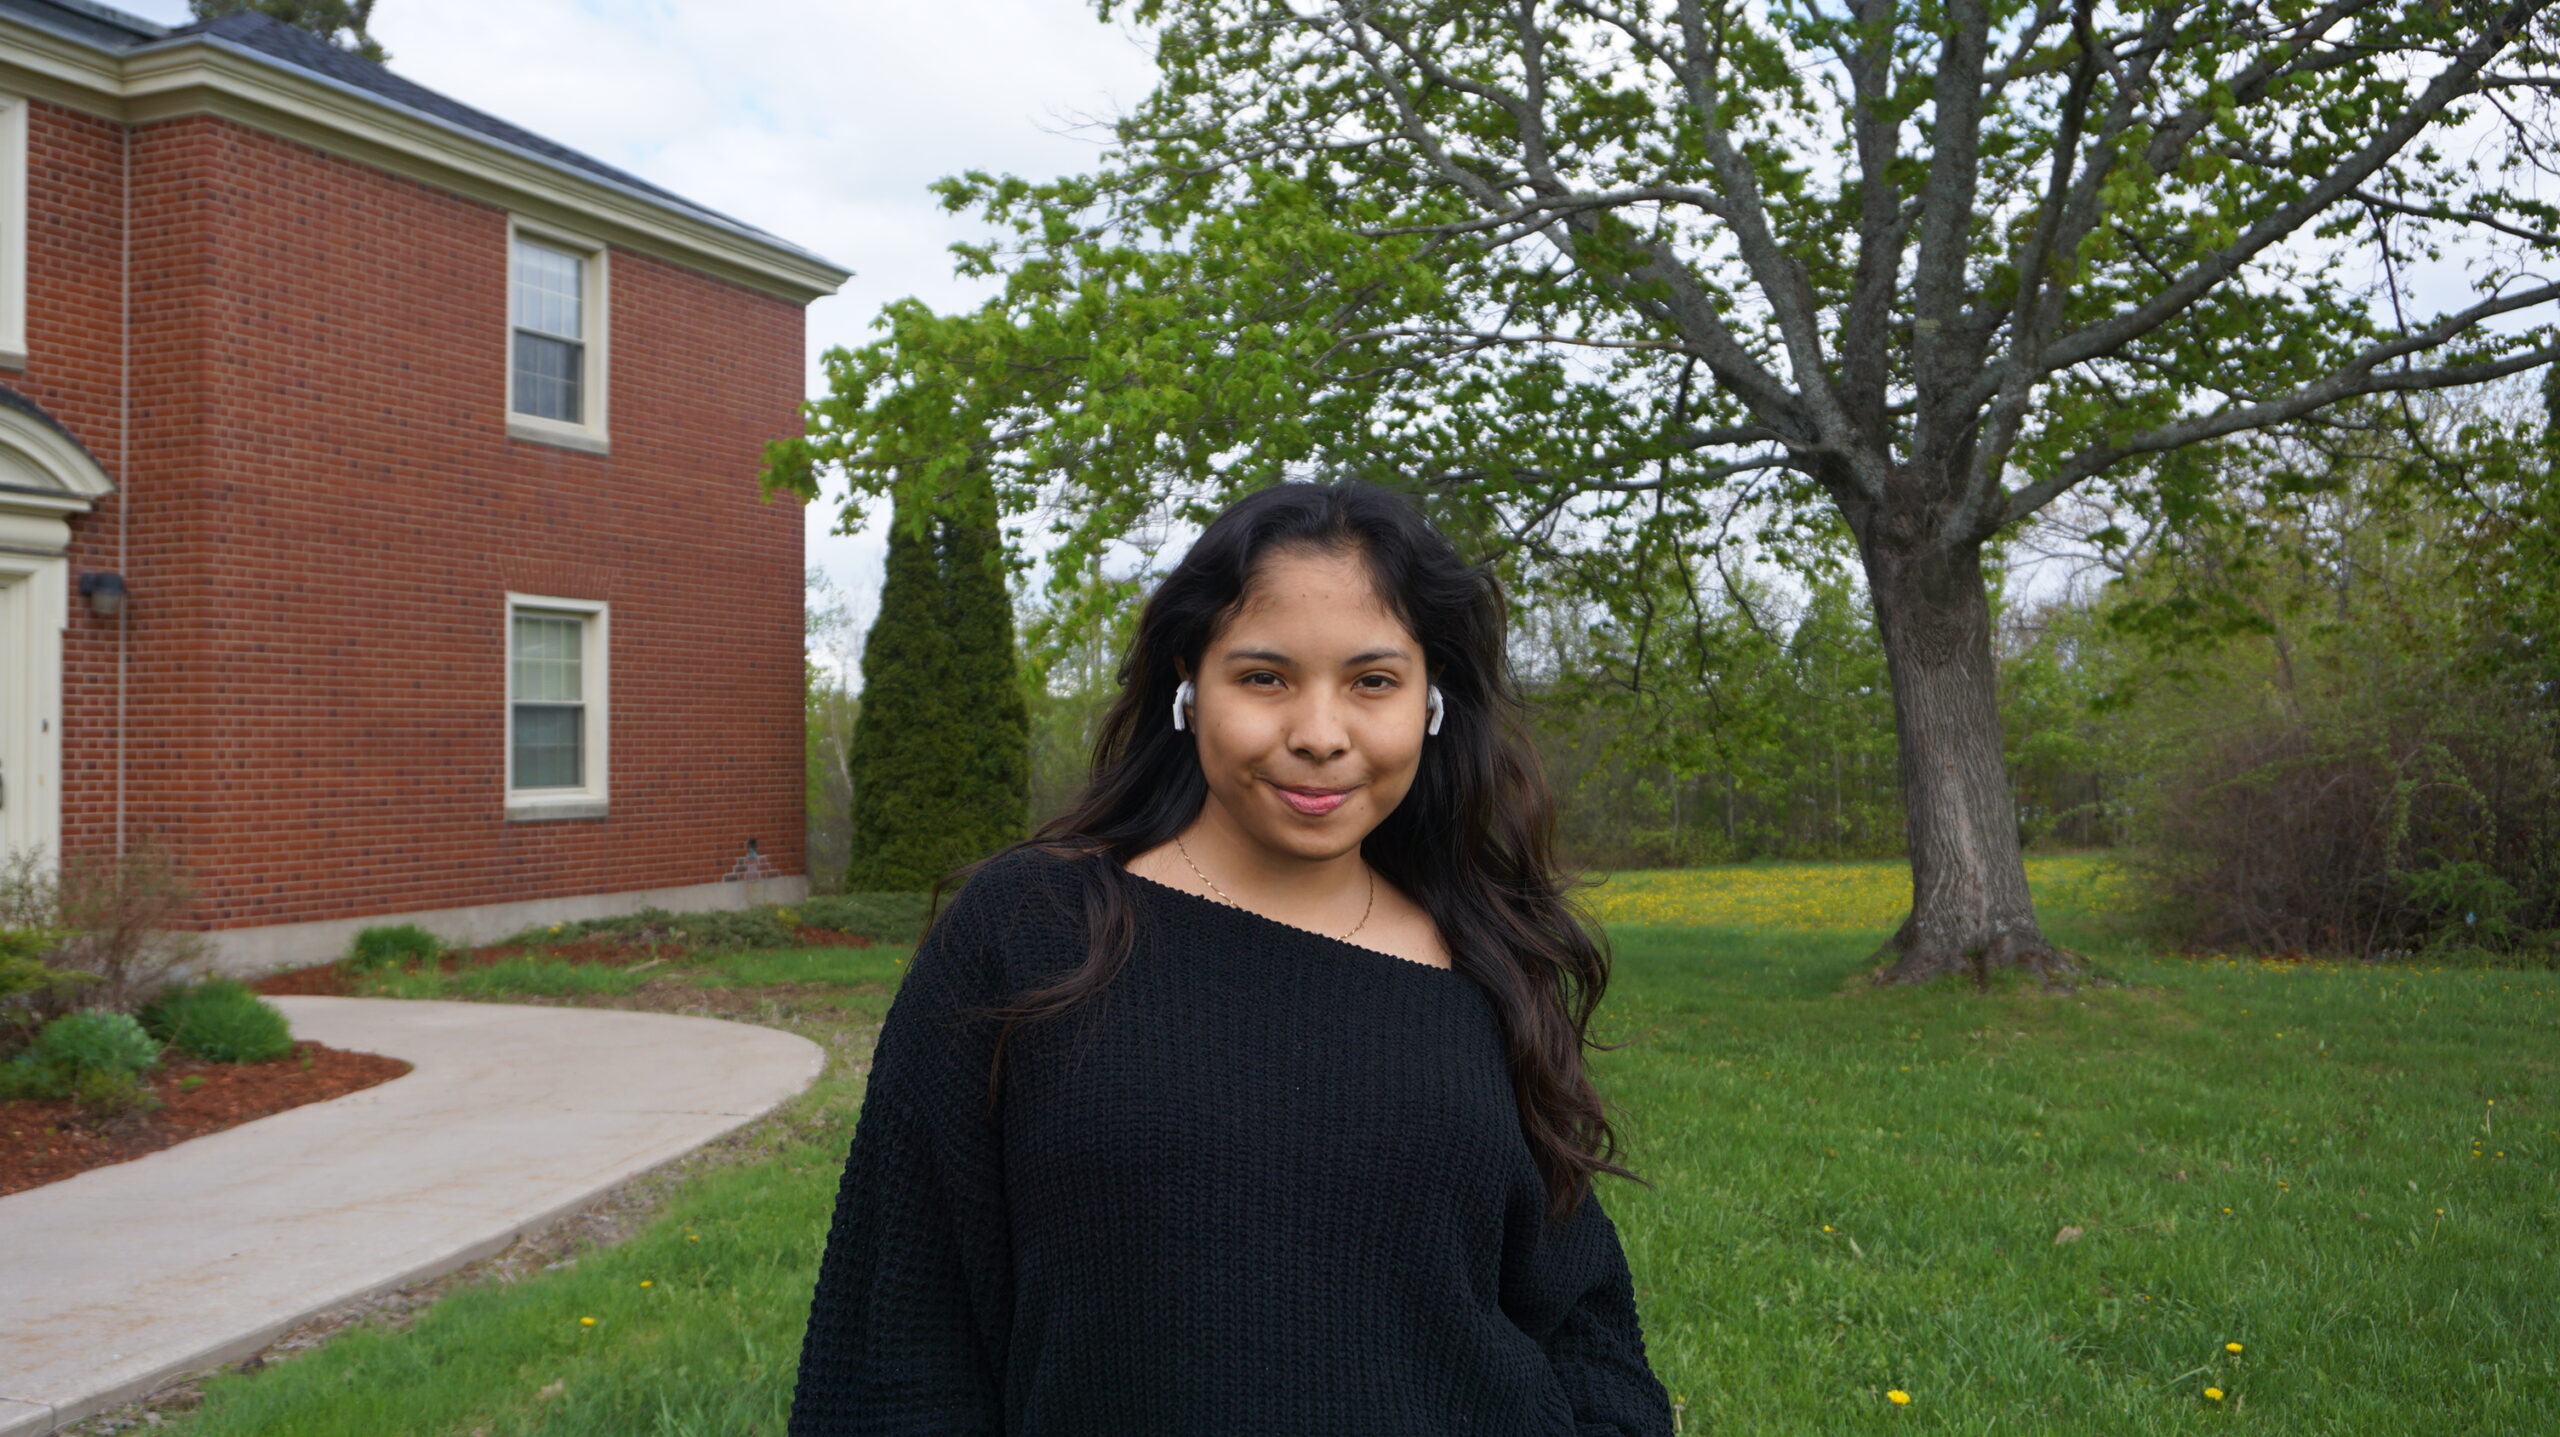 Emilia Alviar, an international student from Ecuador, is studying at St. Thomas University in New Brunswick.